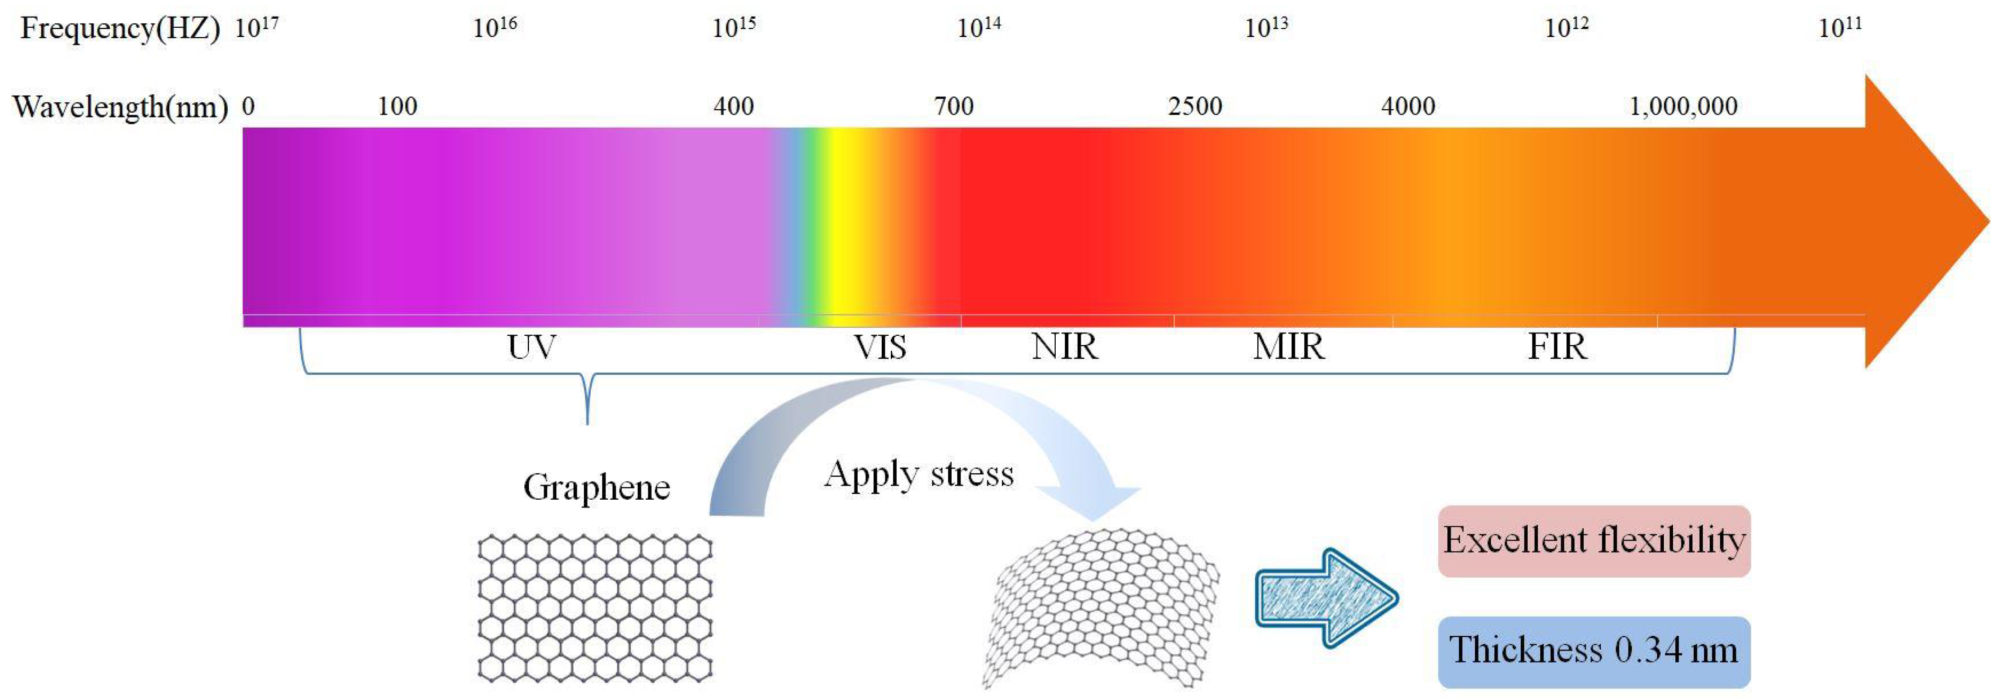 Bandgap values of various 2D materials and their corresponding detection ranges. Detection range and properties of two-dimensional material graphene.